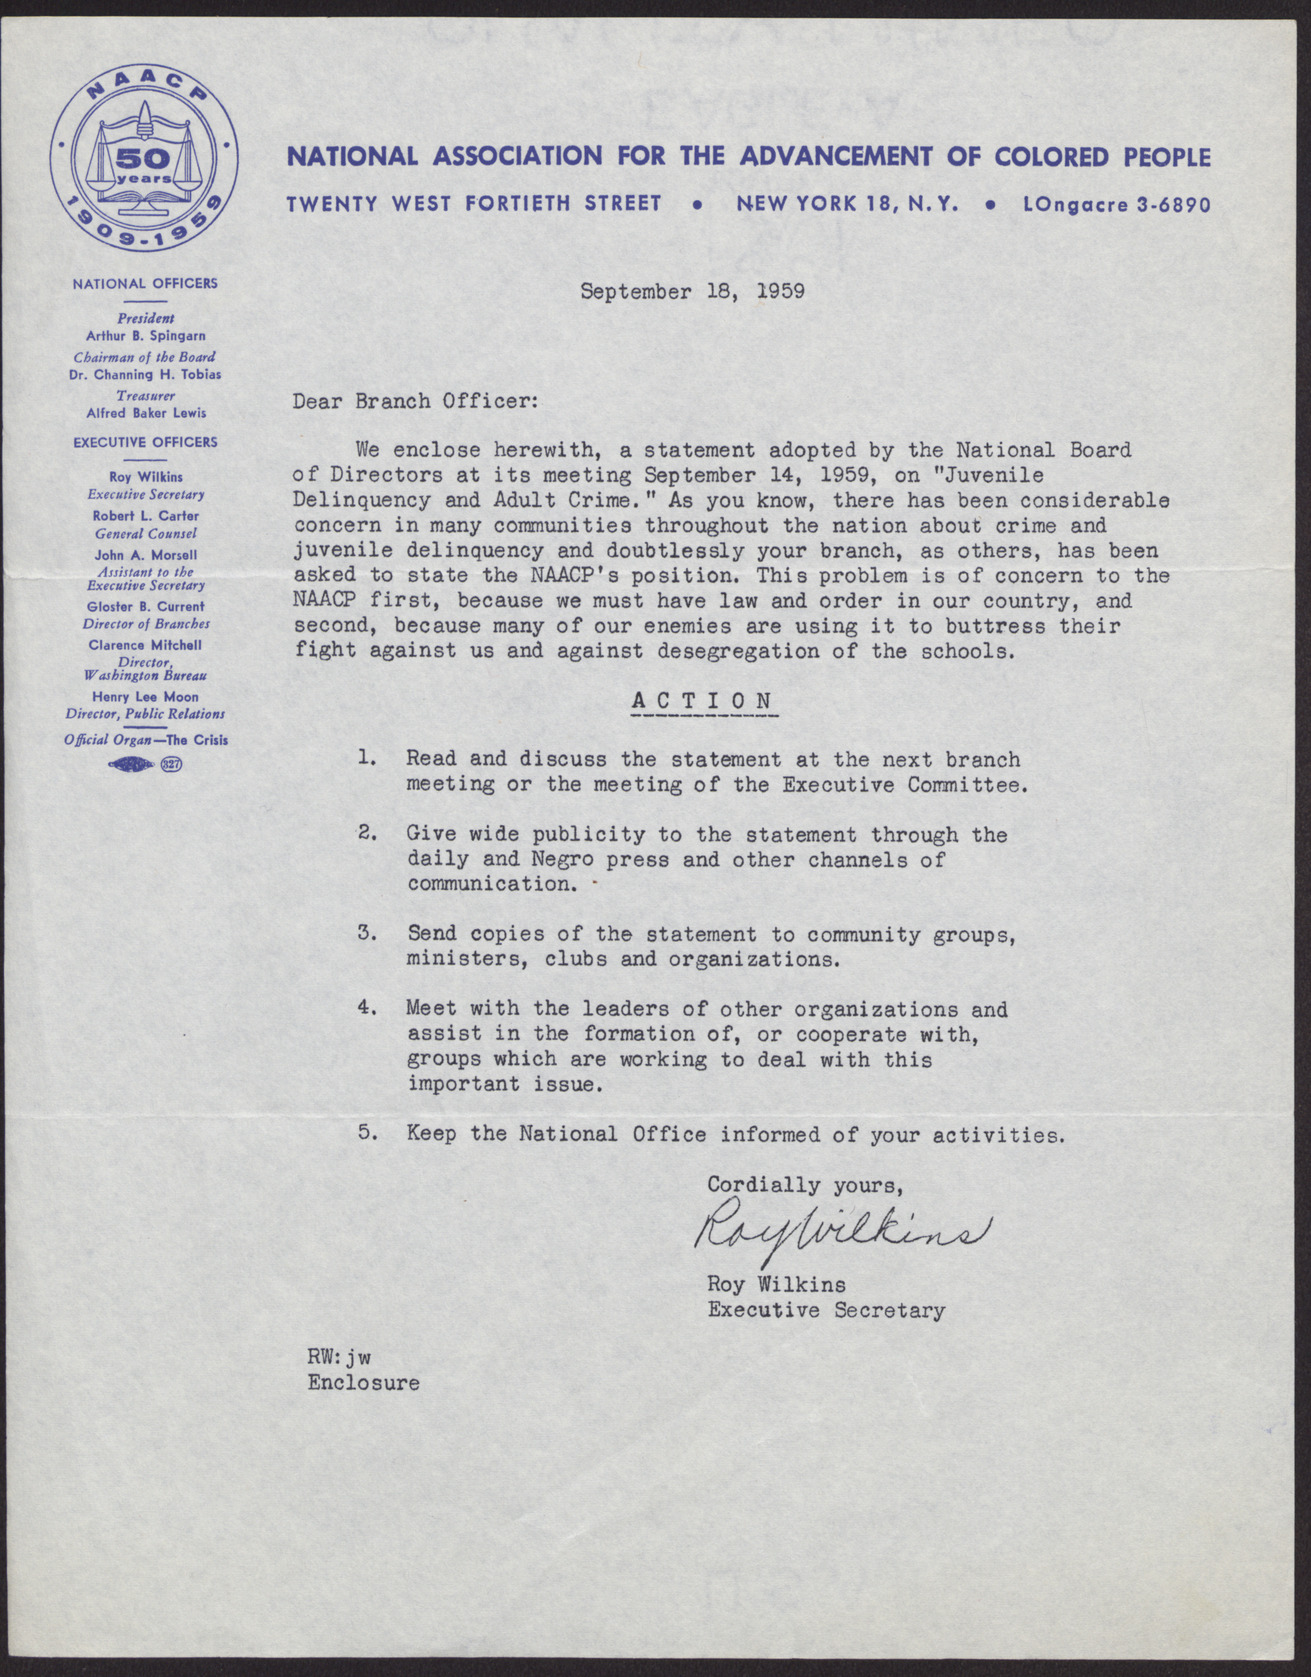 Letter to an unnamed NAACP regional branch officer from Roy Wilkins, September 18, 1959